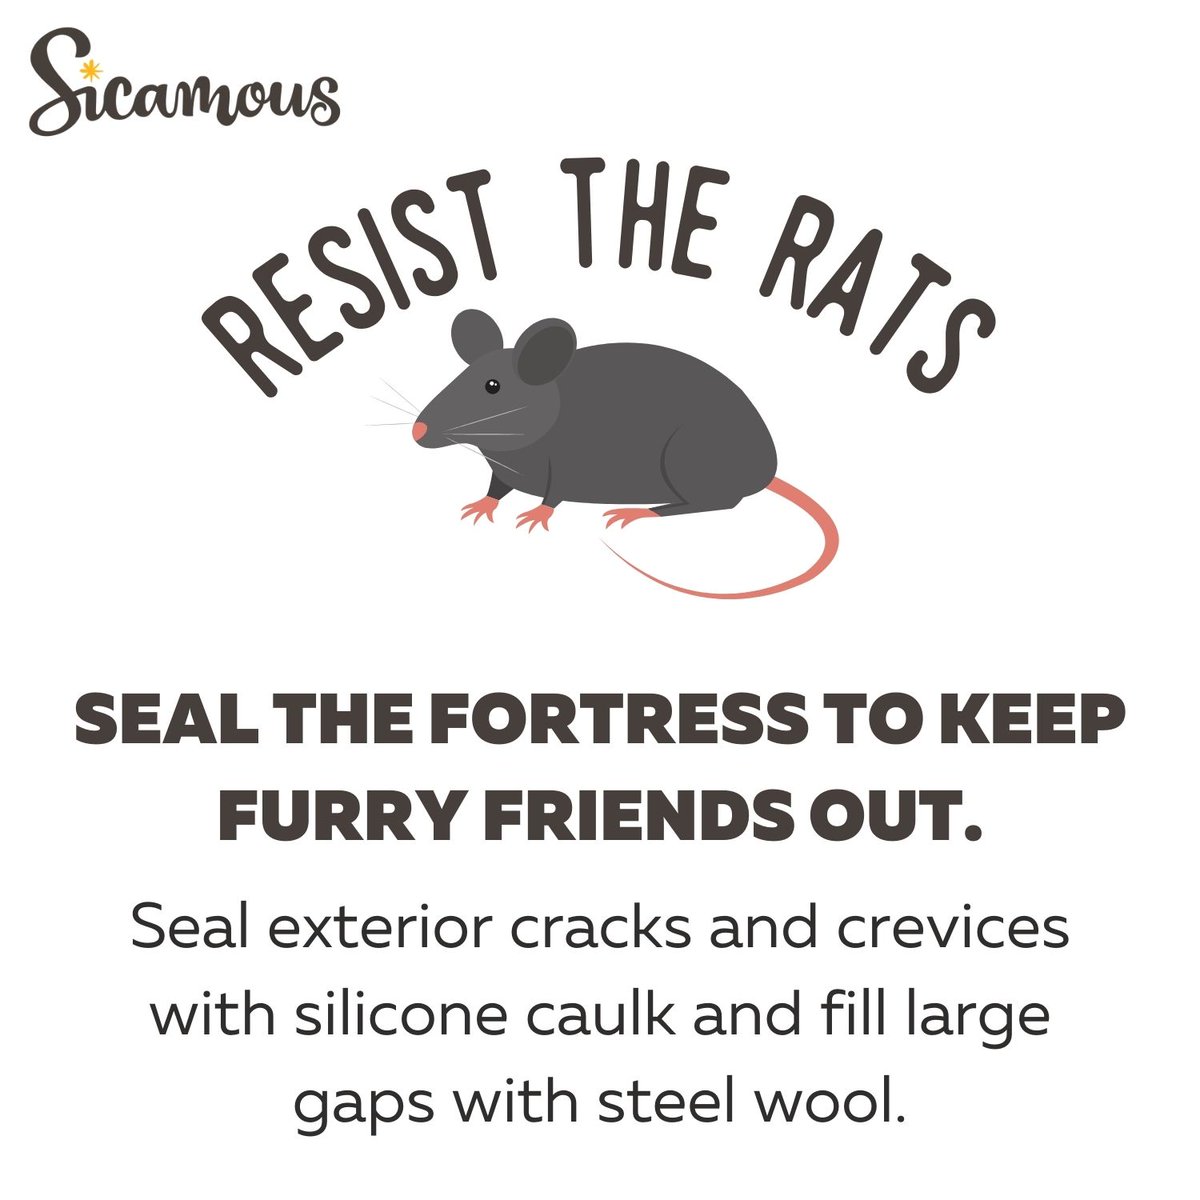 Help stop the spread of invasive rodents!🐀 Learn more about how you can protect your property: ow.ly/lByH50RgzOT
#Sicamous #SIcamousLiveMore #InvasiveRodents #Shuswap